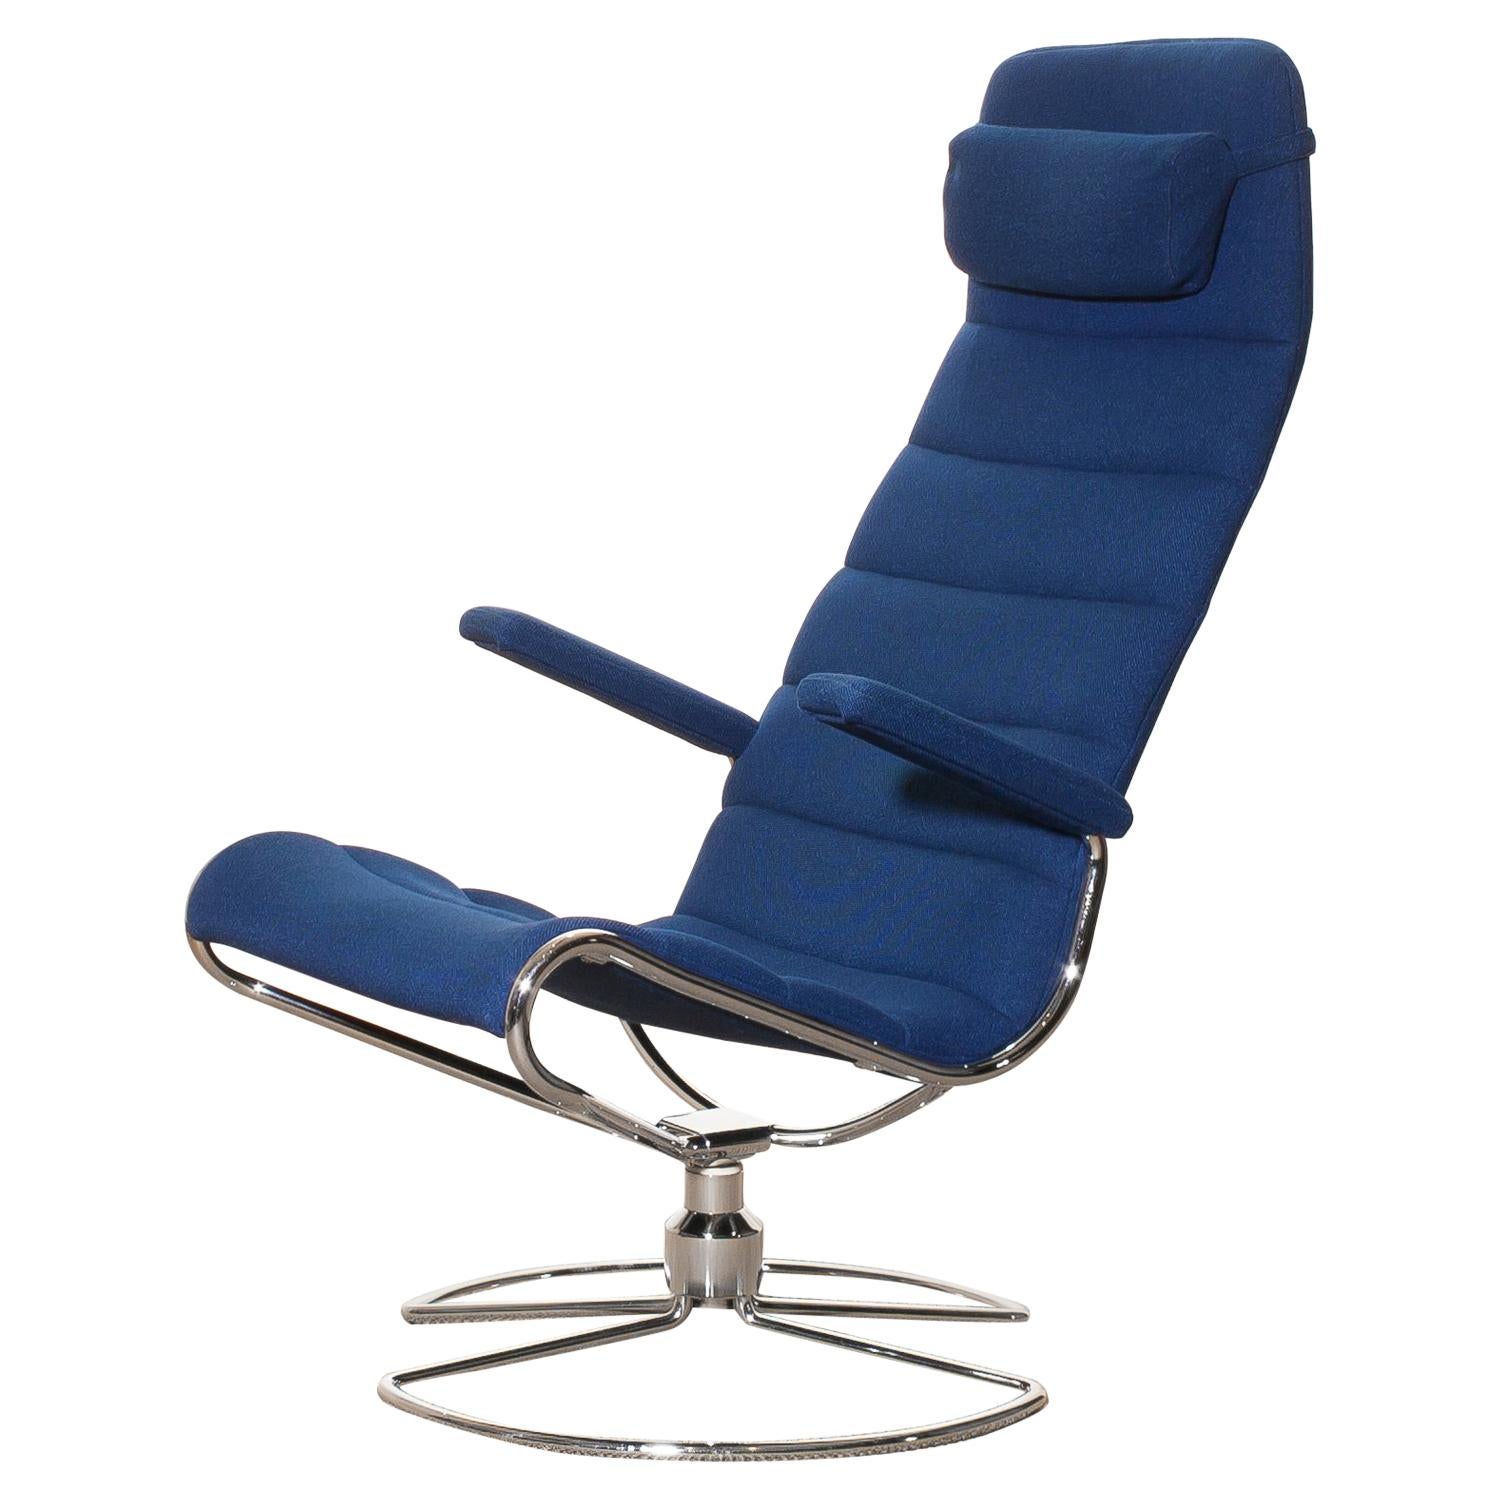 Beautiful 'Minister' chair designed by Bruno Mathsson.
It is upholstered with a Royal blue wooden fabric mounted on a swivel base of tubular chromed steel.
The chair is in very good condition,
Period 1980s.
Dimensions: H 109 cm, W 60 cm, D 77